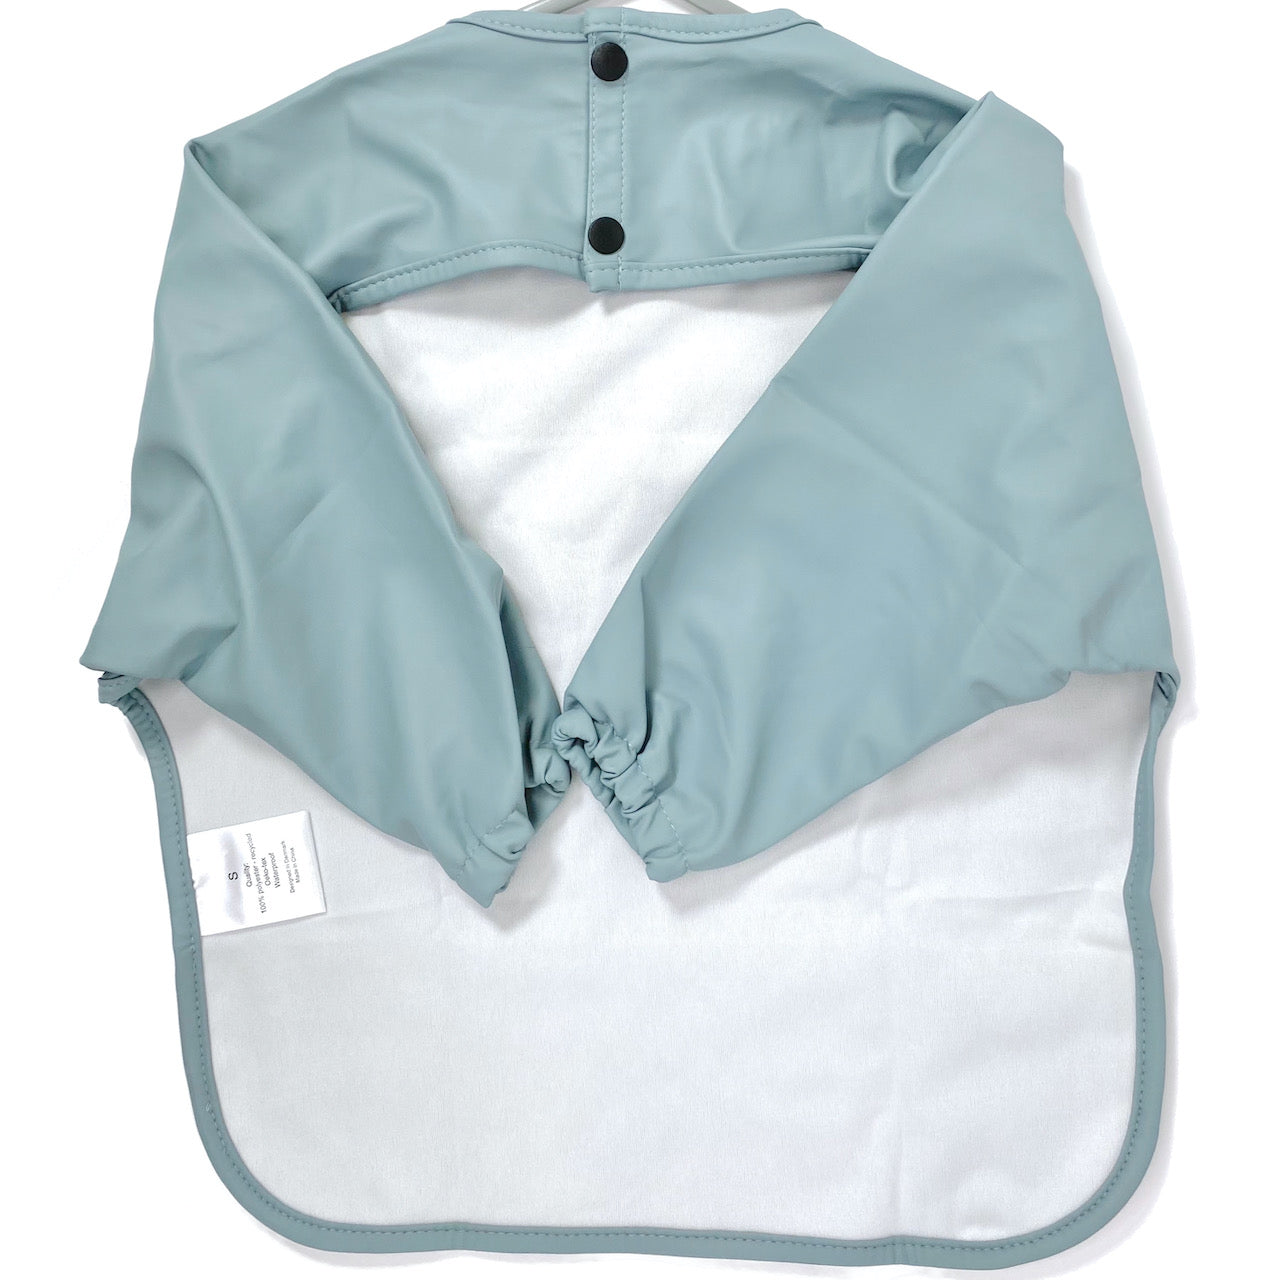 Long-sleeve kids apron in an ice blue colour, showing back view.